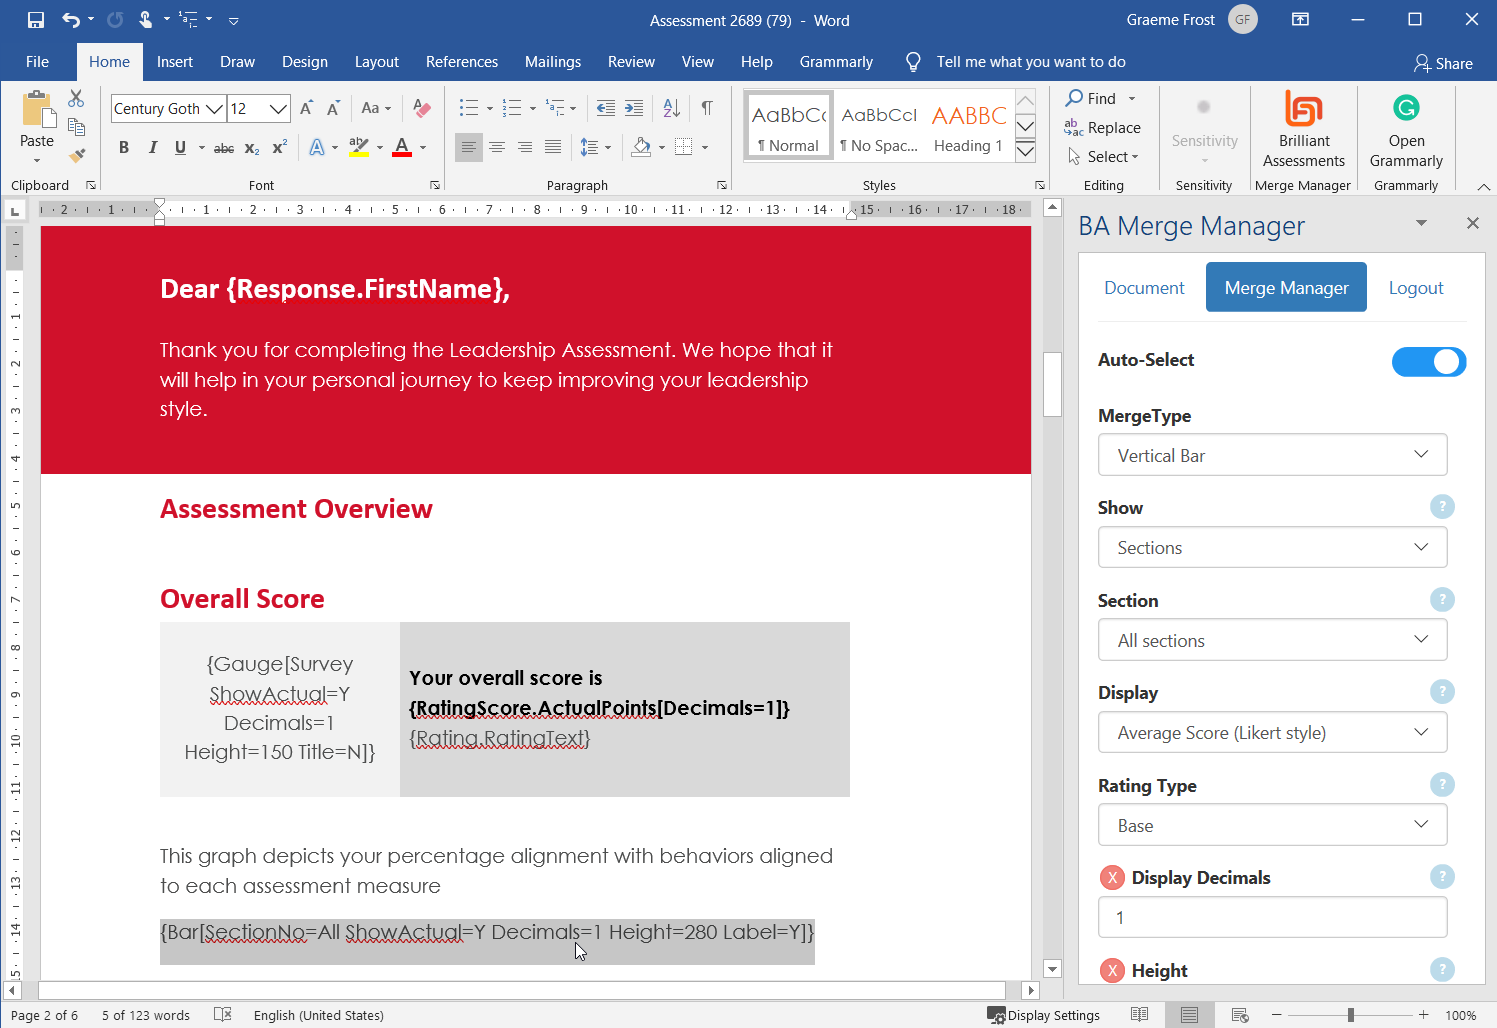 Feedback Reports are created in MS Word using Brilliant's Merge Manager addin.